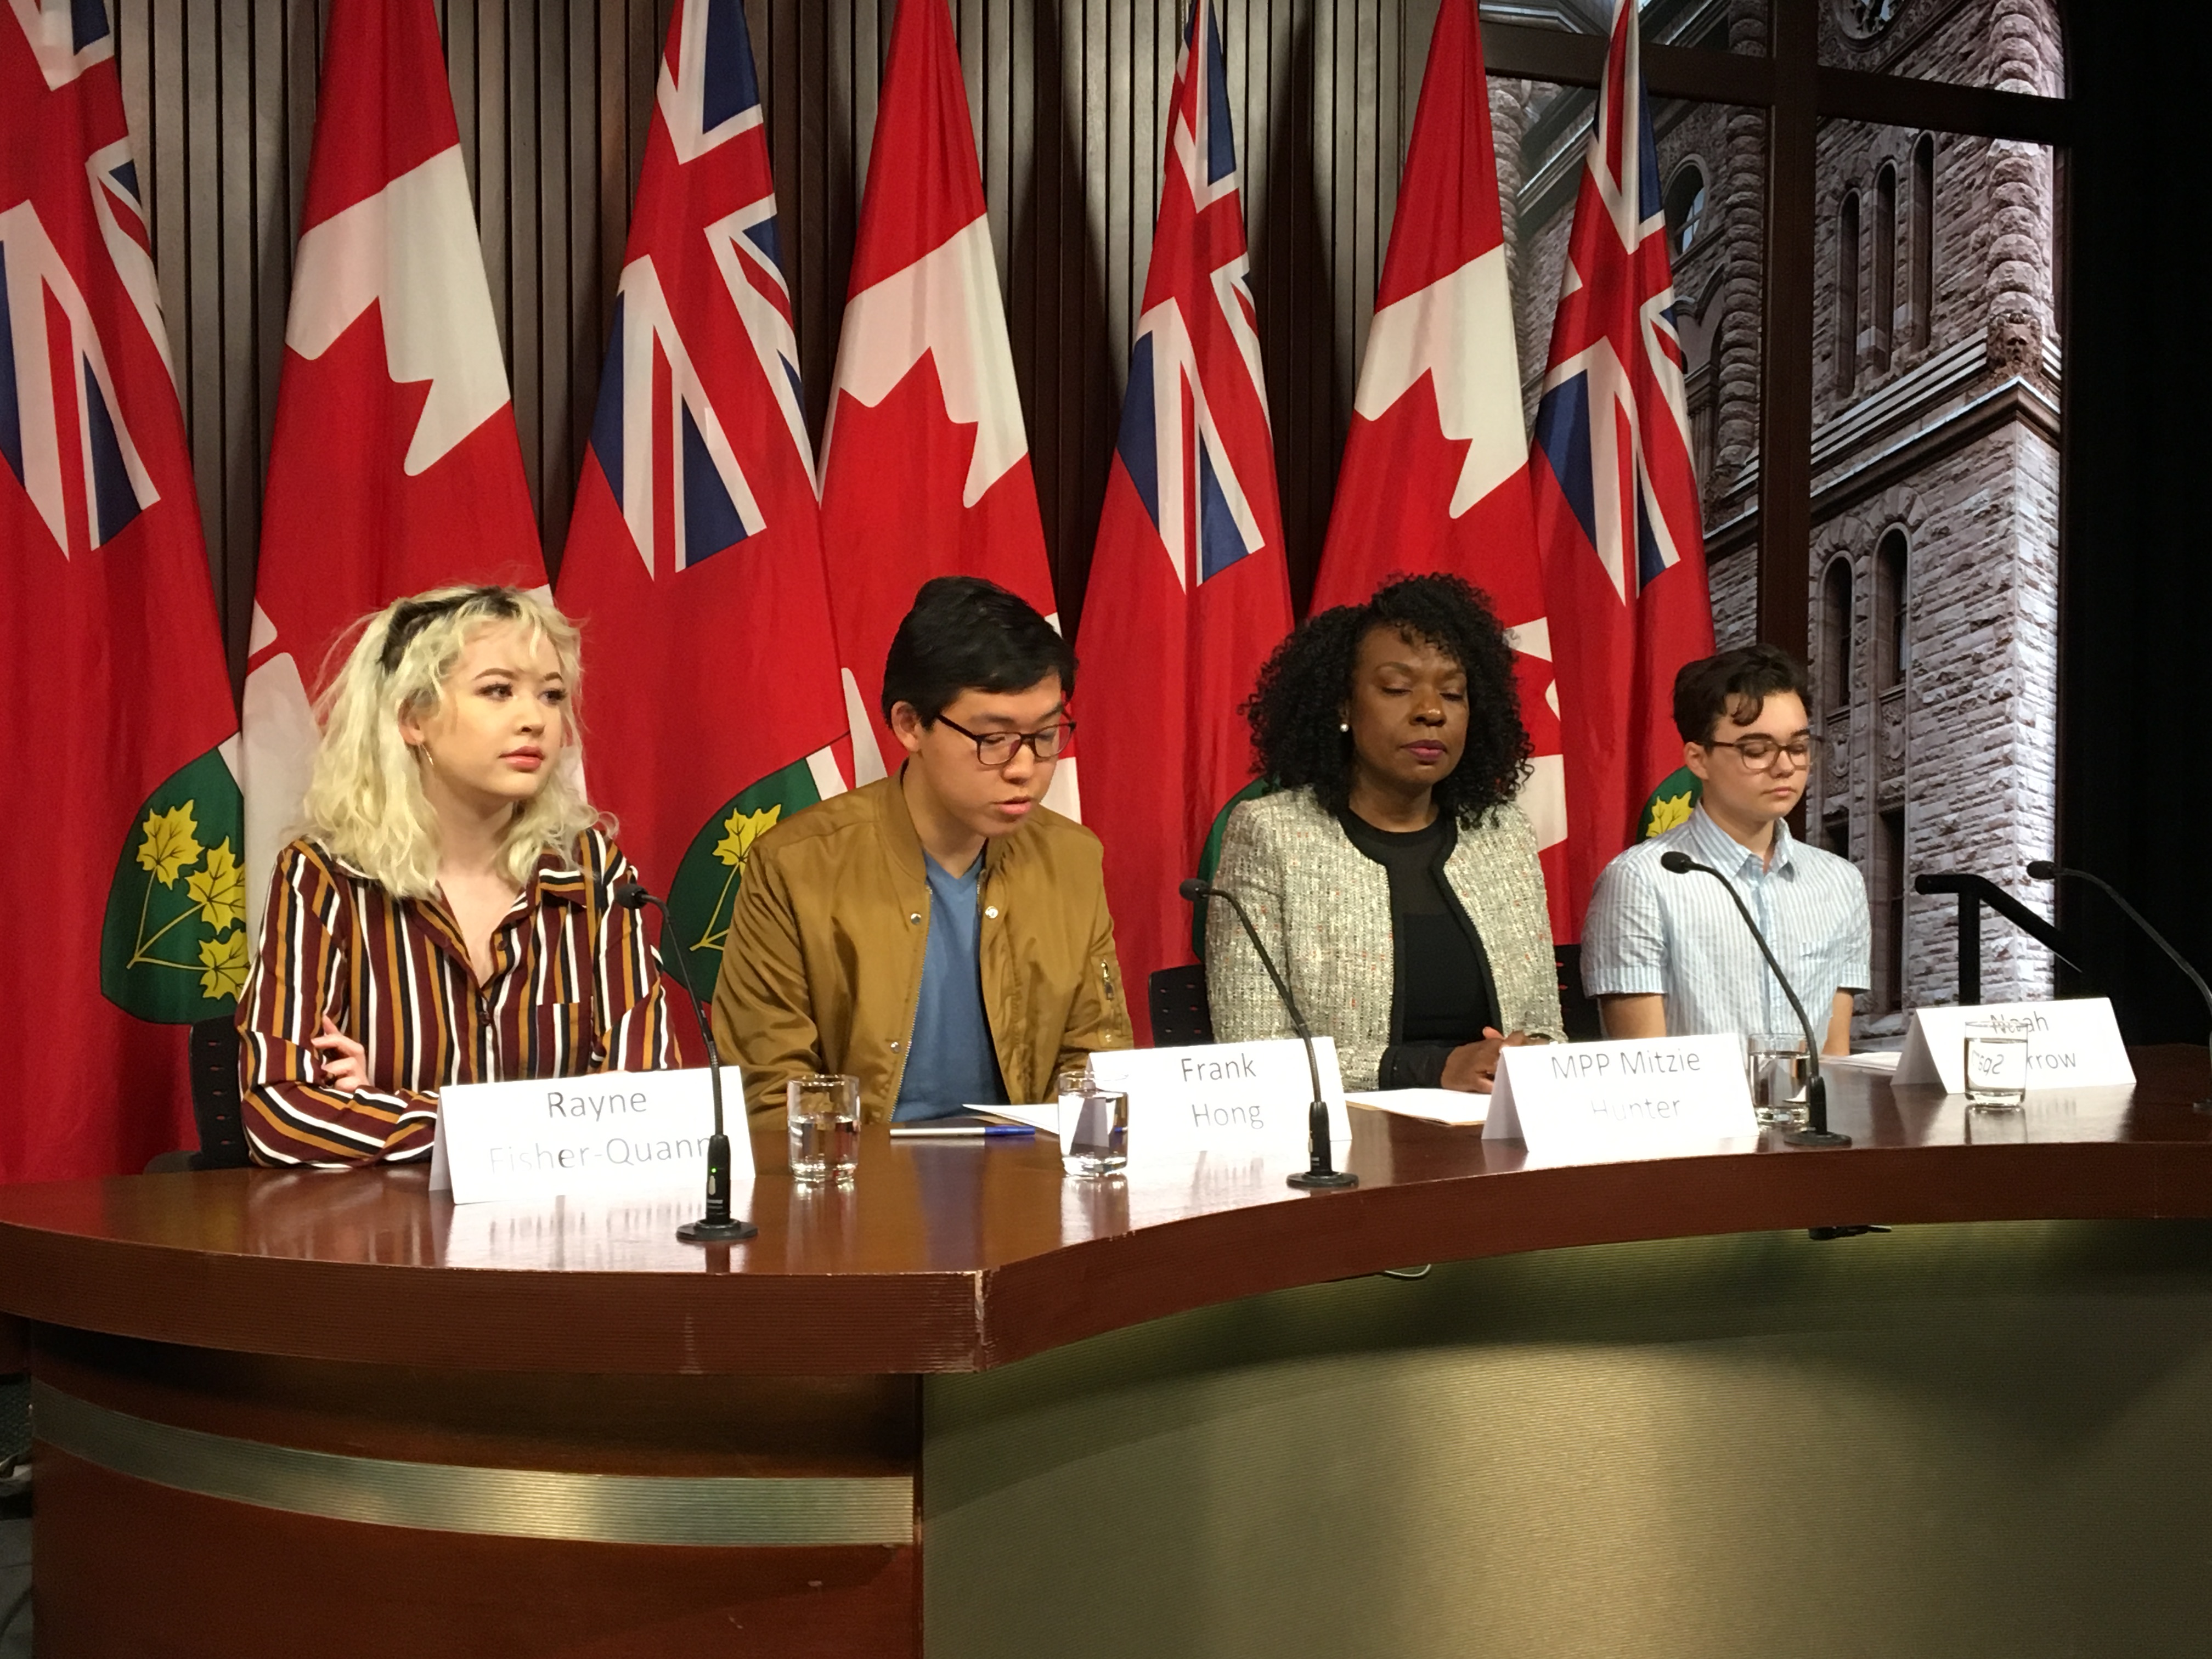 Premier is ‘incredible at getting us mad and getting us active,’ student organizing mass walkout says